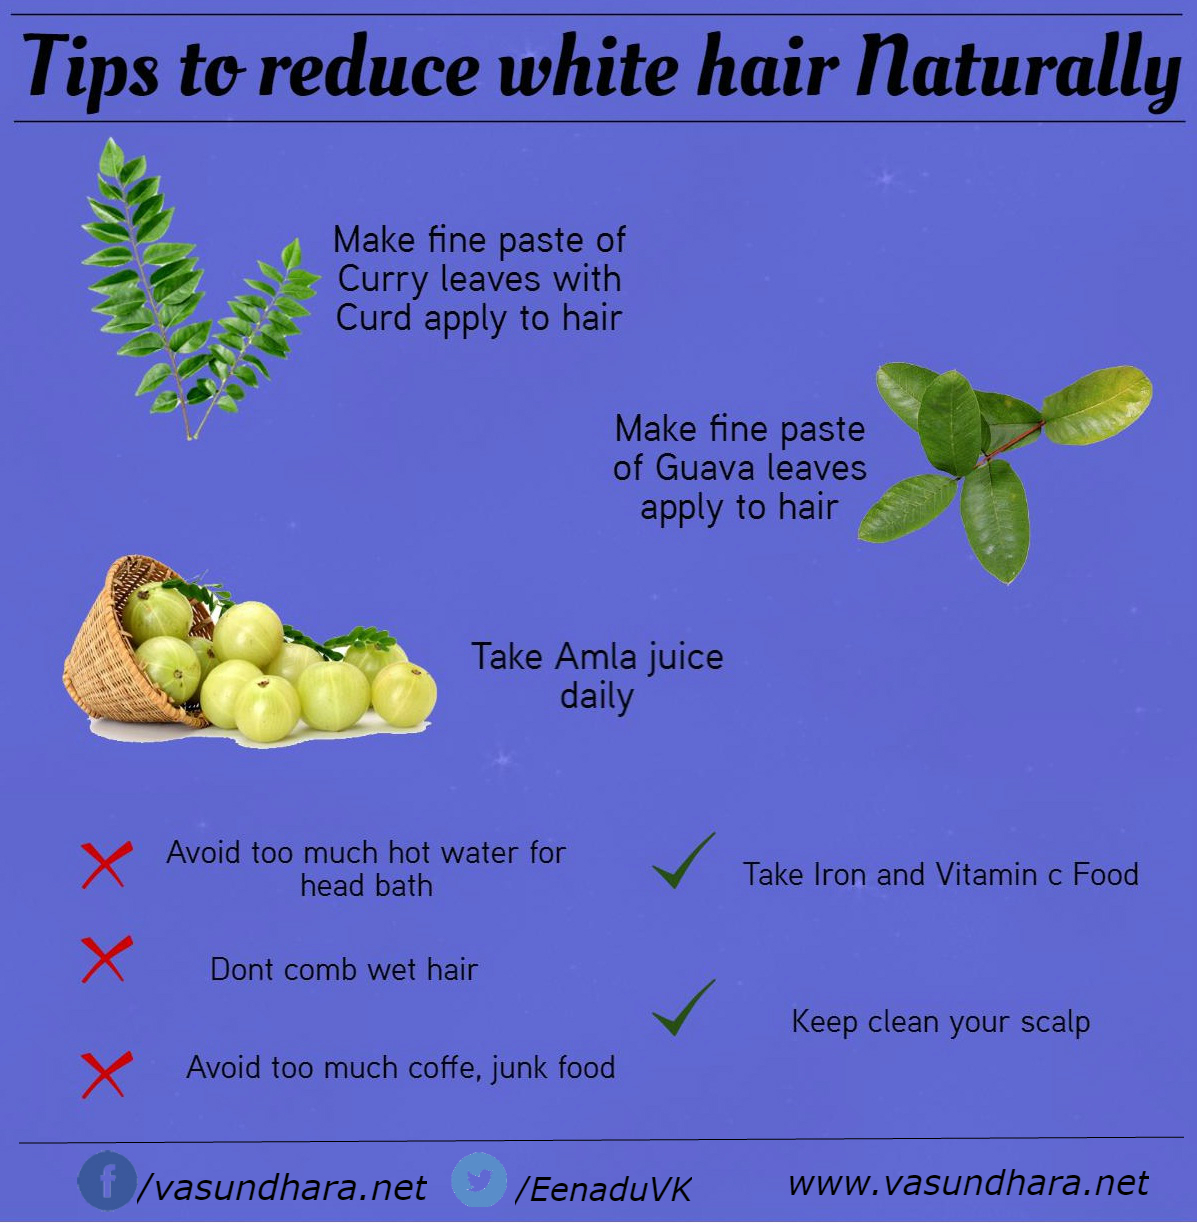 Top three food items that prevent excessive hair loss in monsoon season